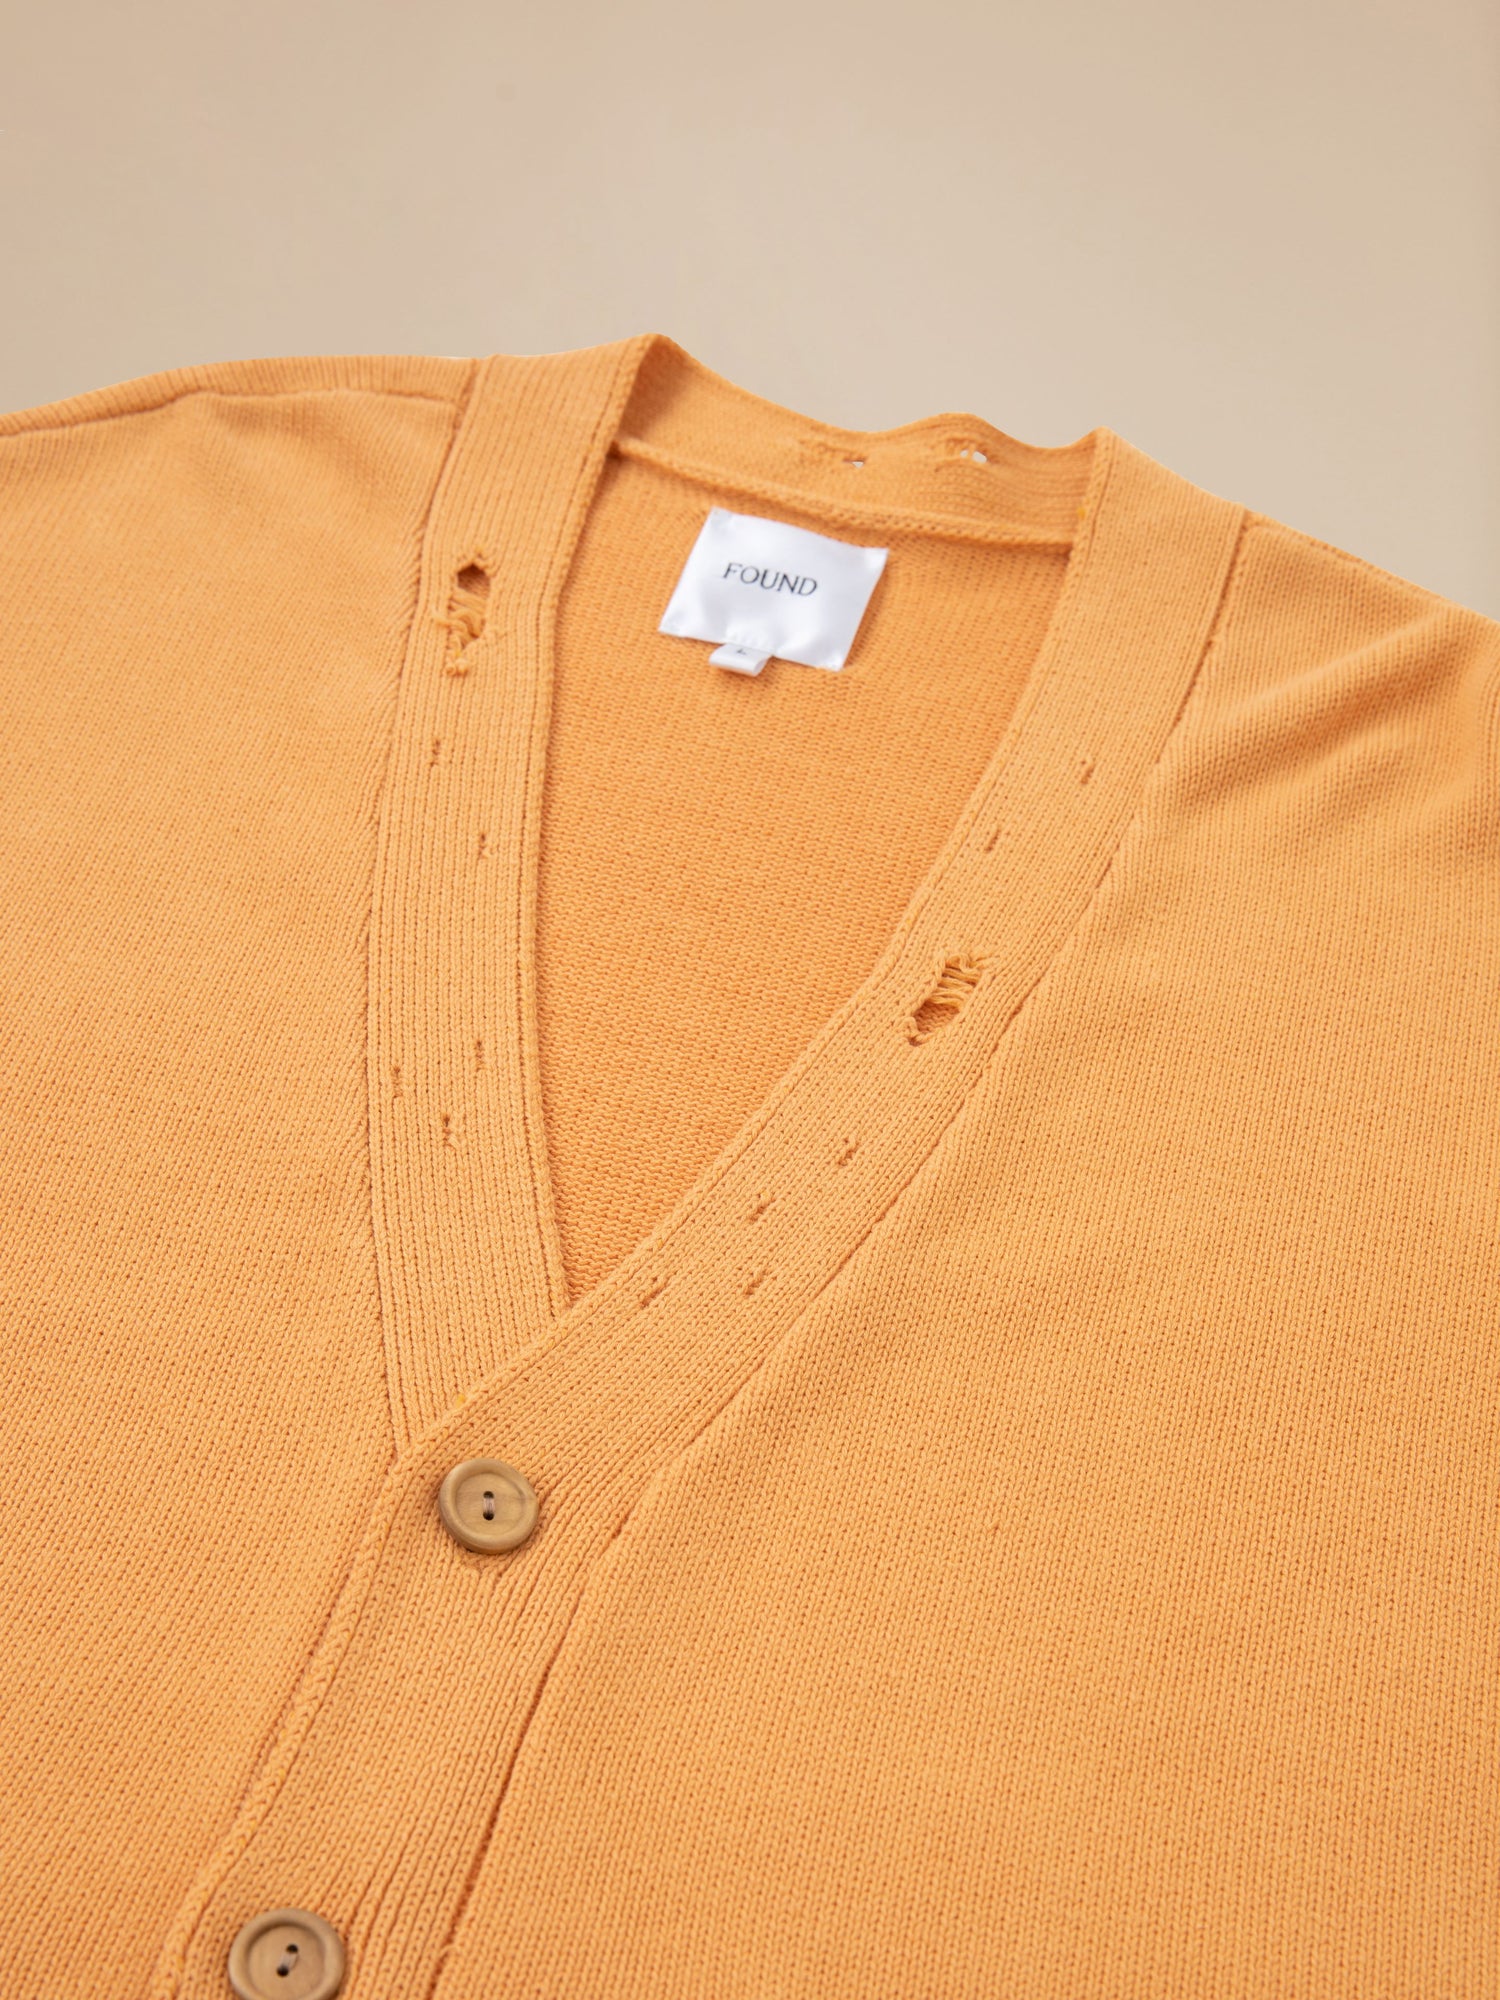 A Cadmium Distressed Cardigan by Found with buttons on the front.